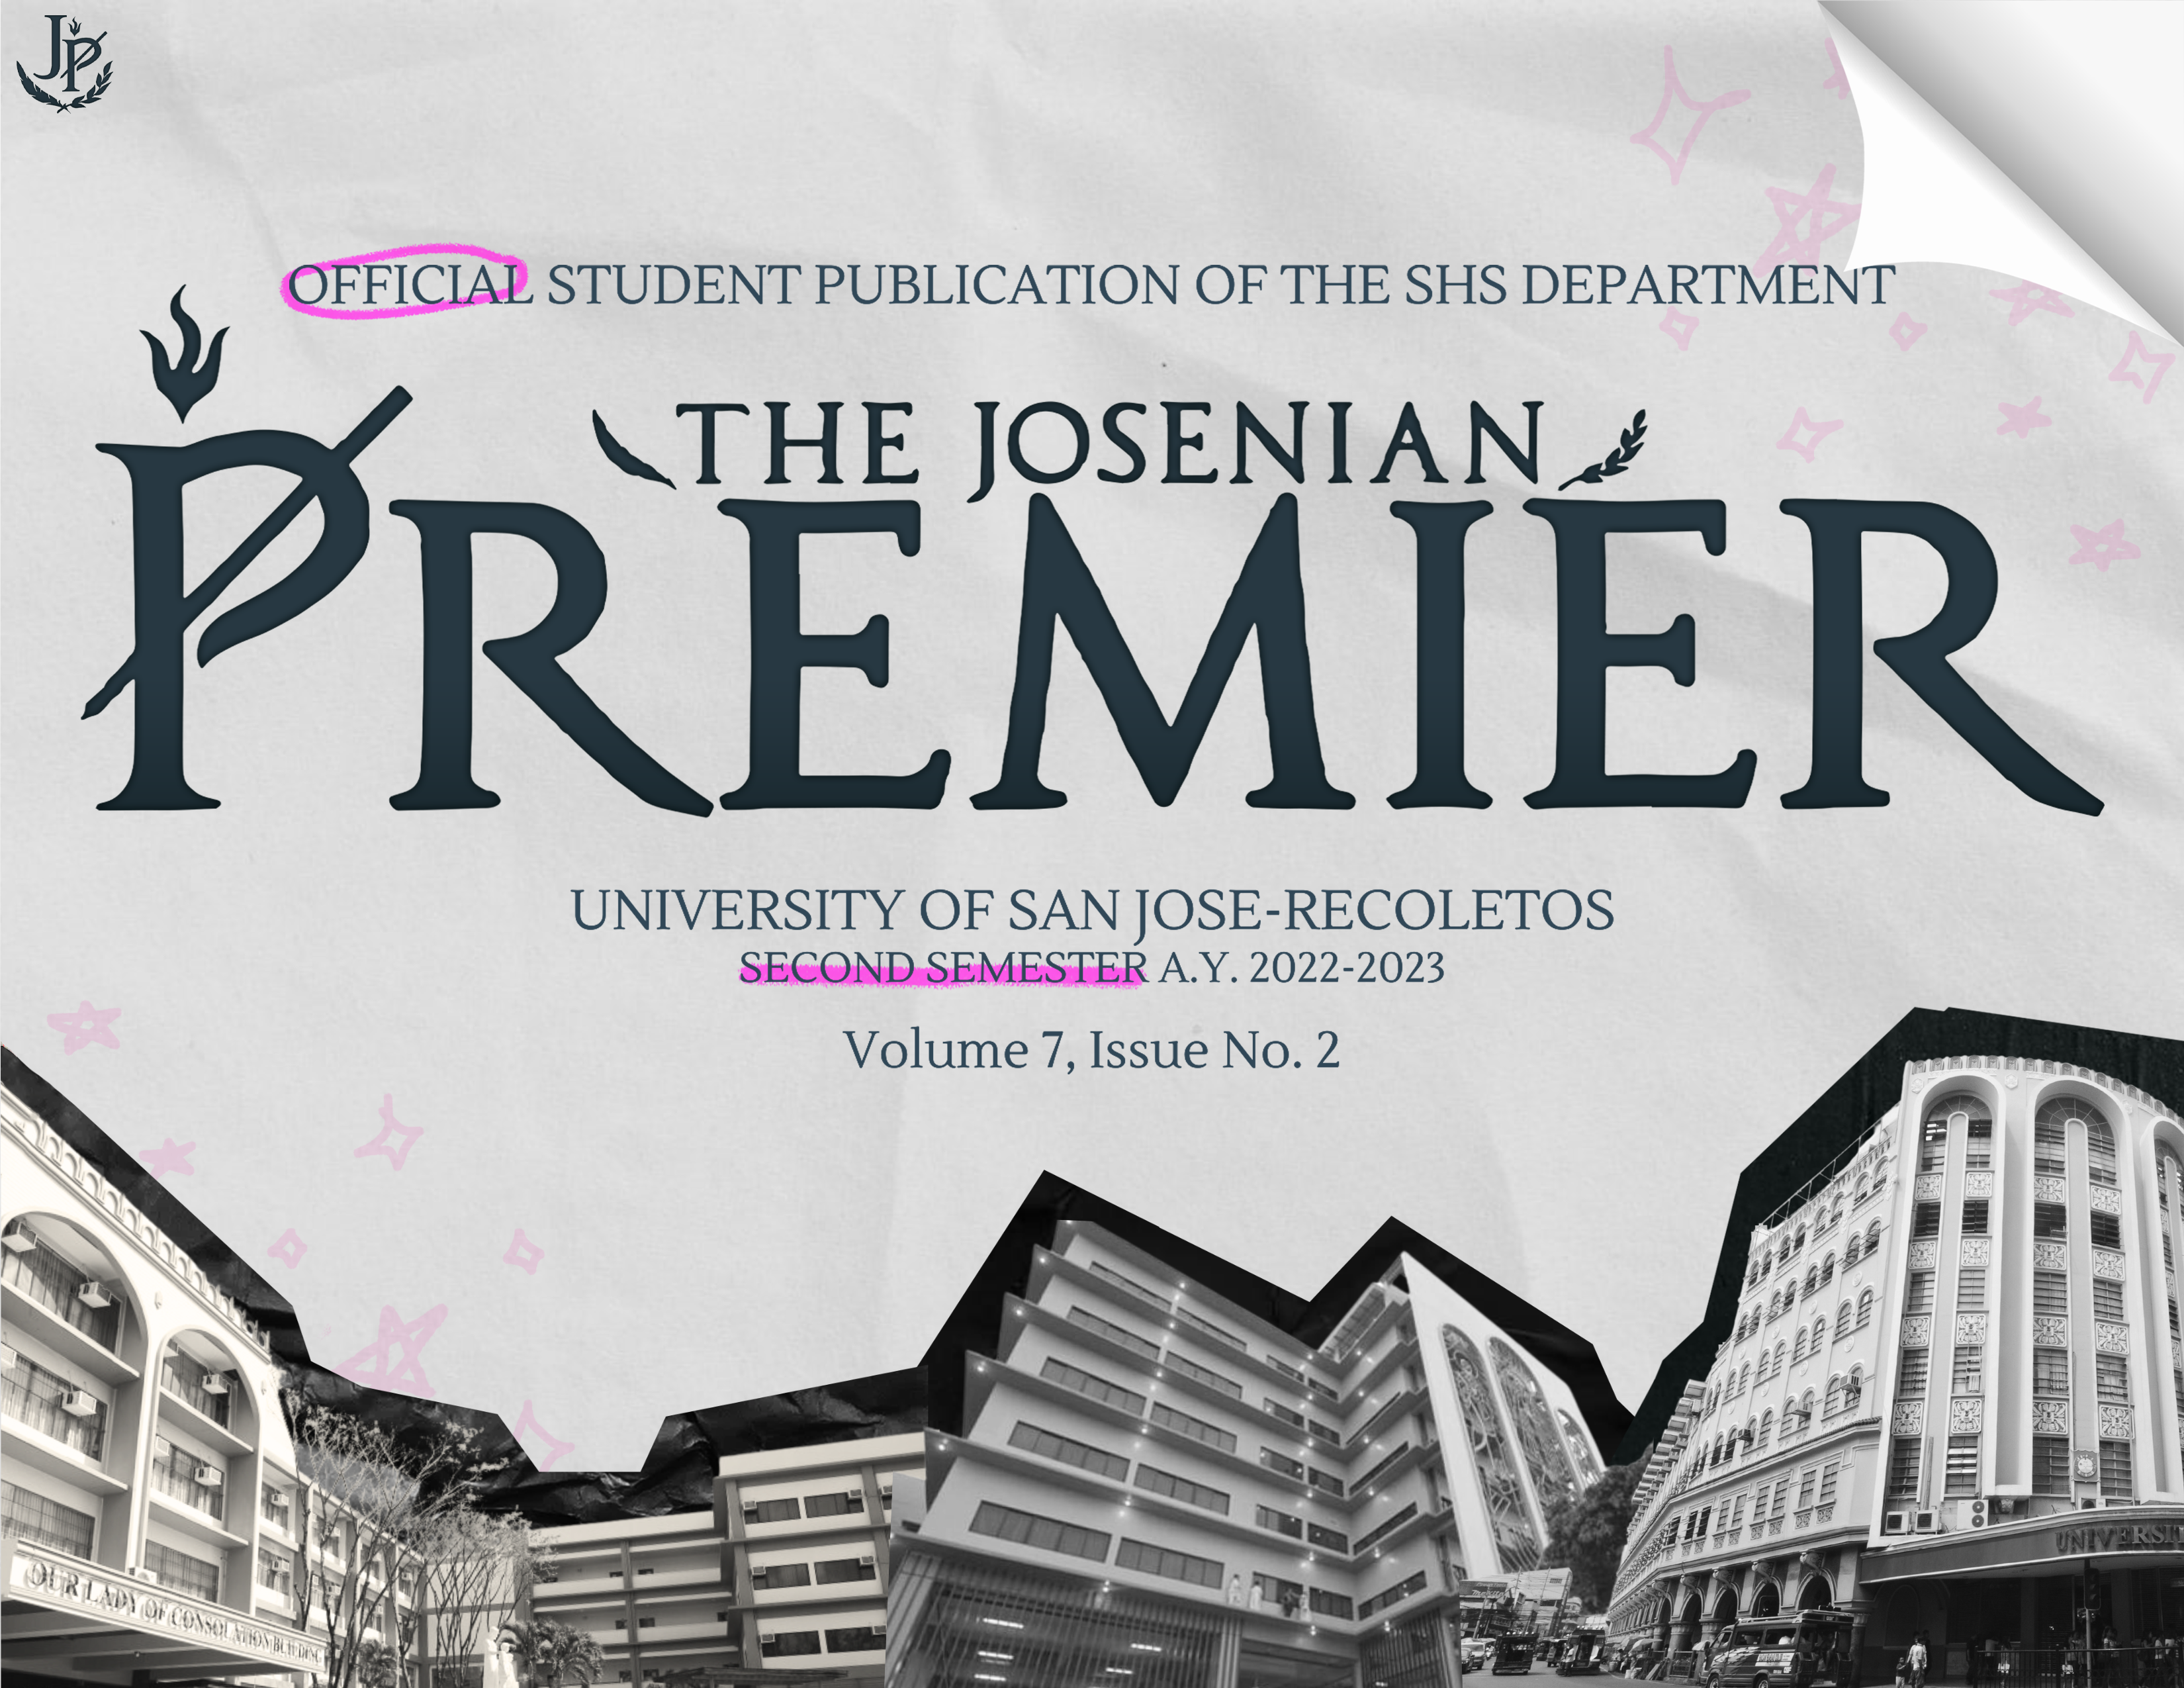 The Josenian Premier releases magazine issue for 2nd semester of AY 2022-2023